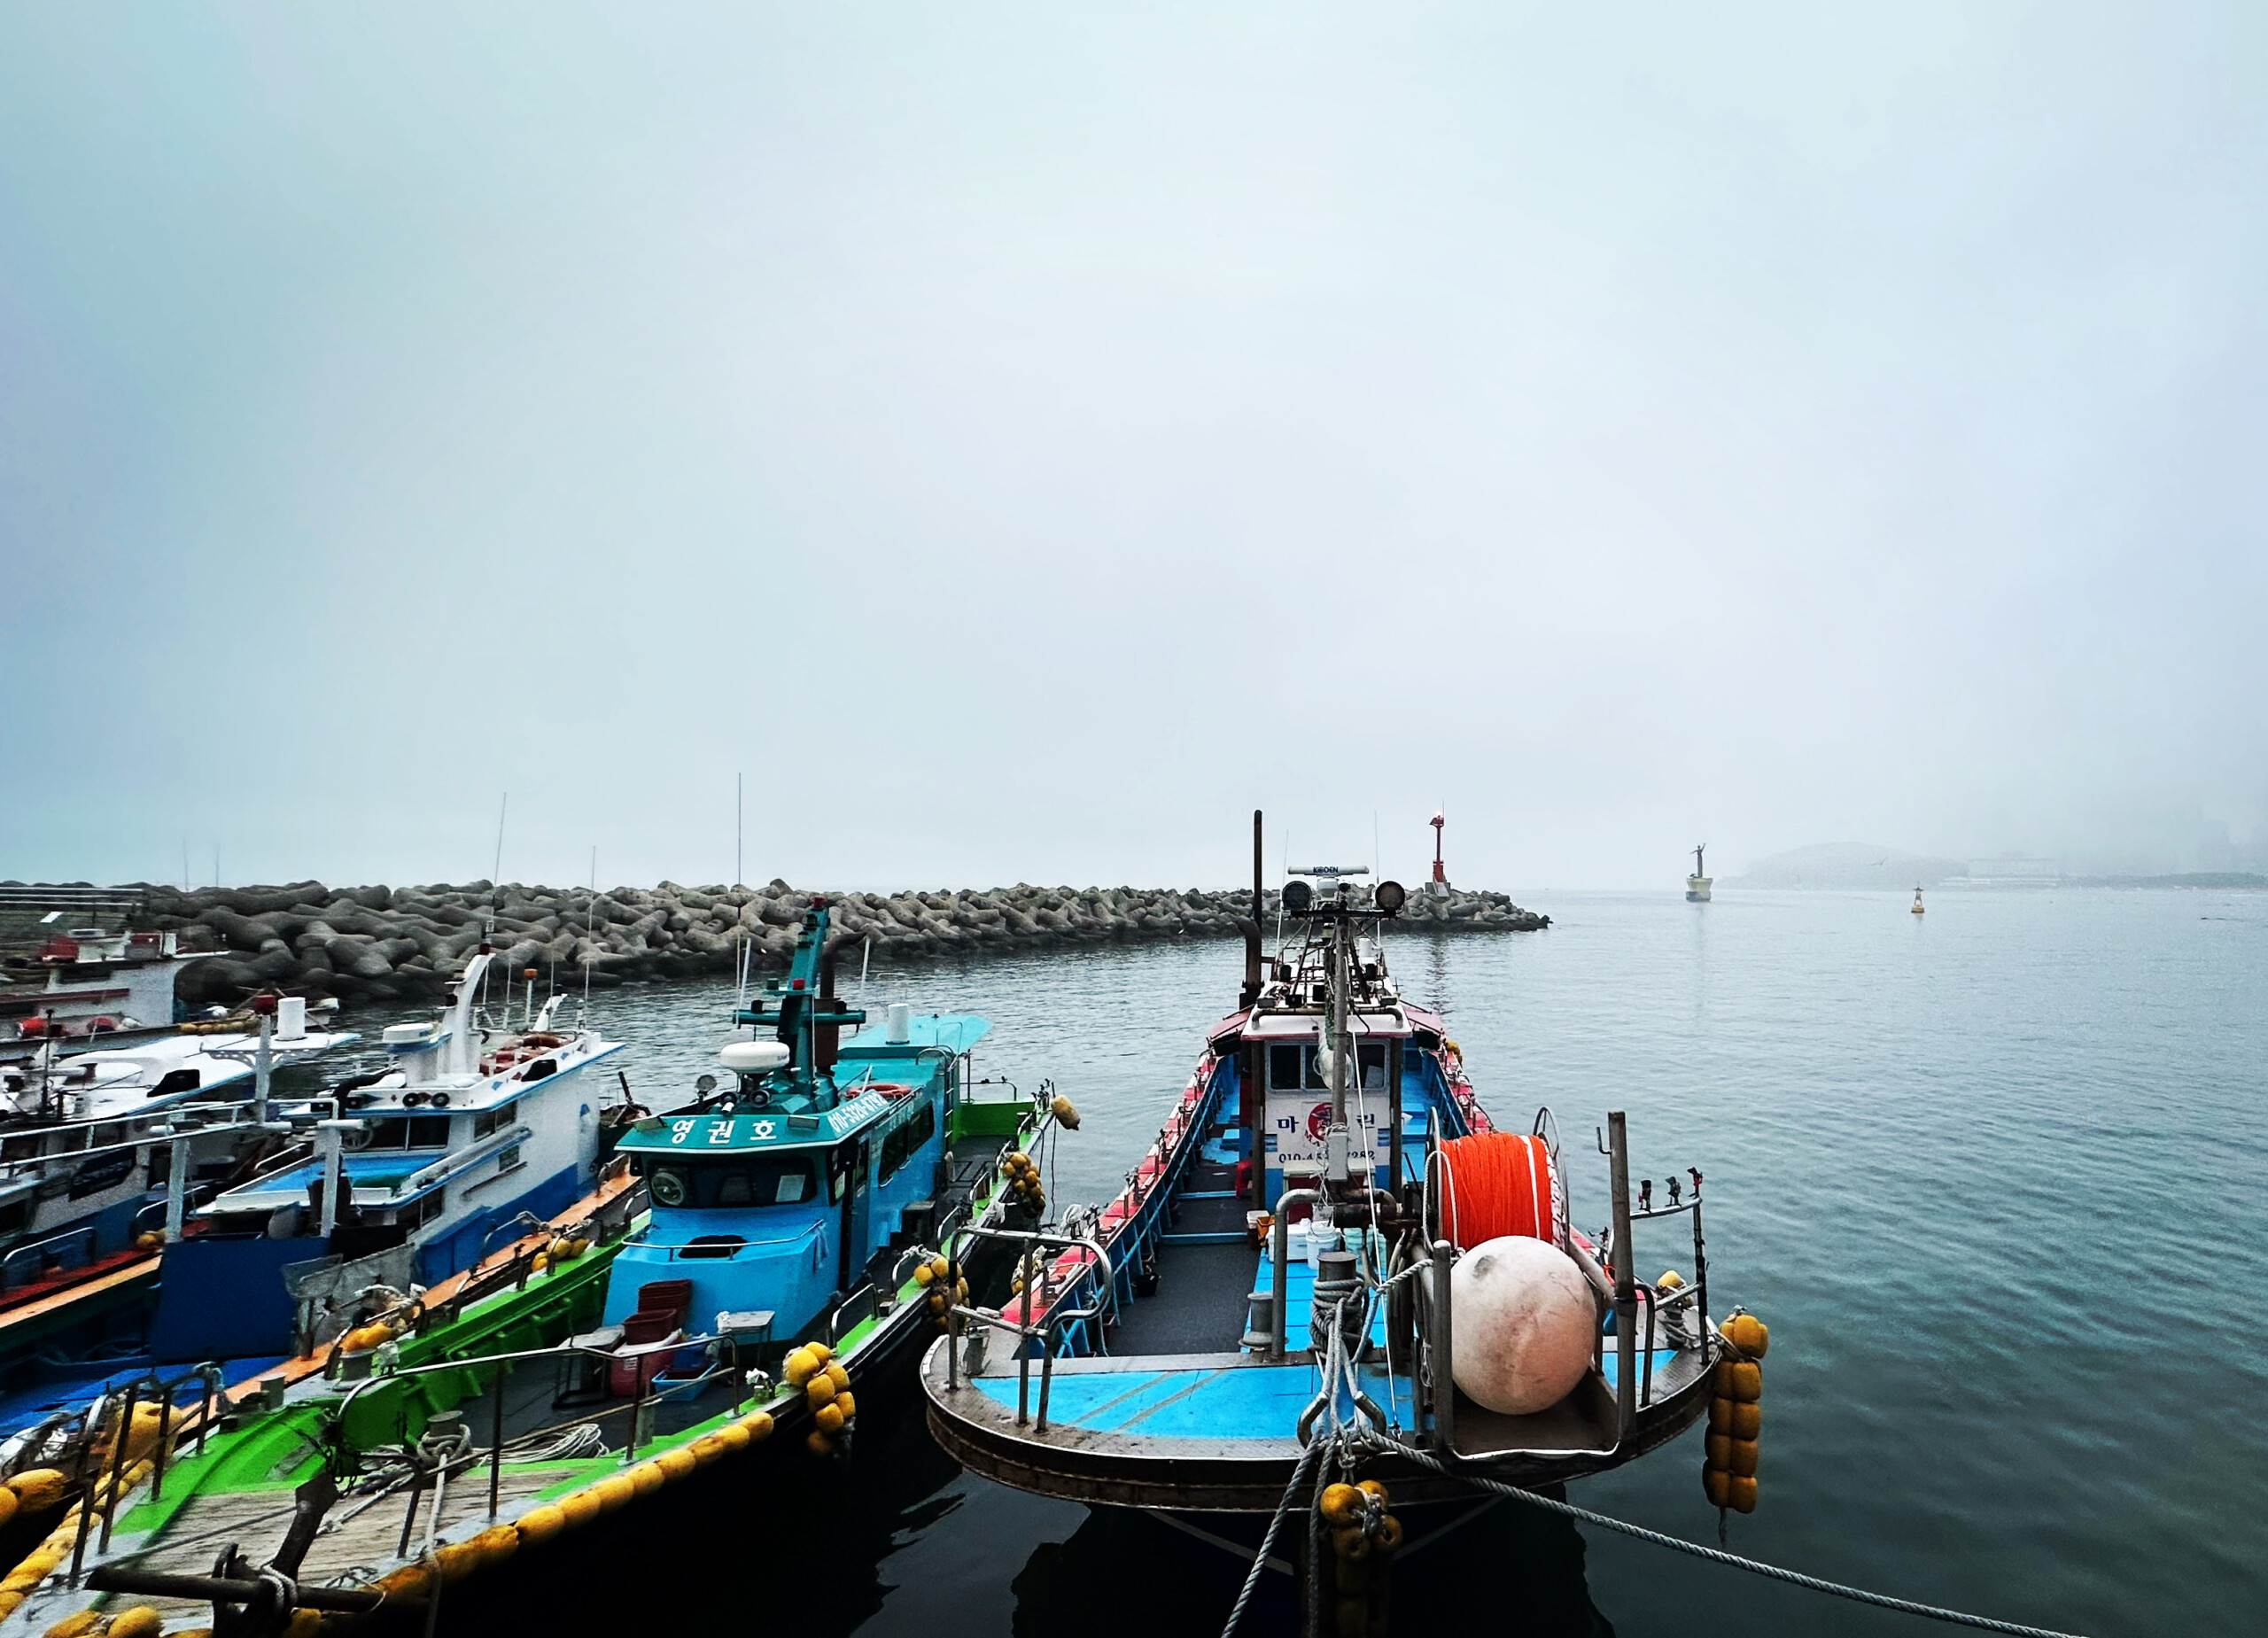 Busan is home to numerous marinas and fishing boats like this one just down from Haeundae Beach.   